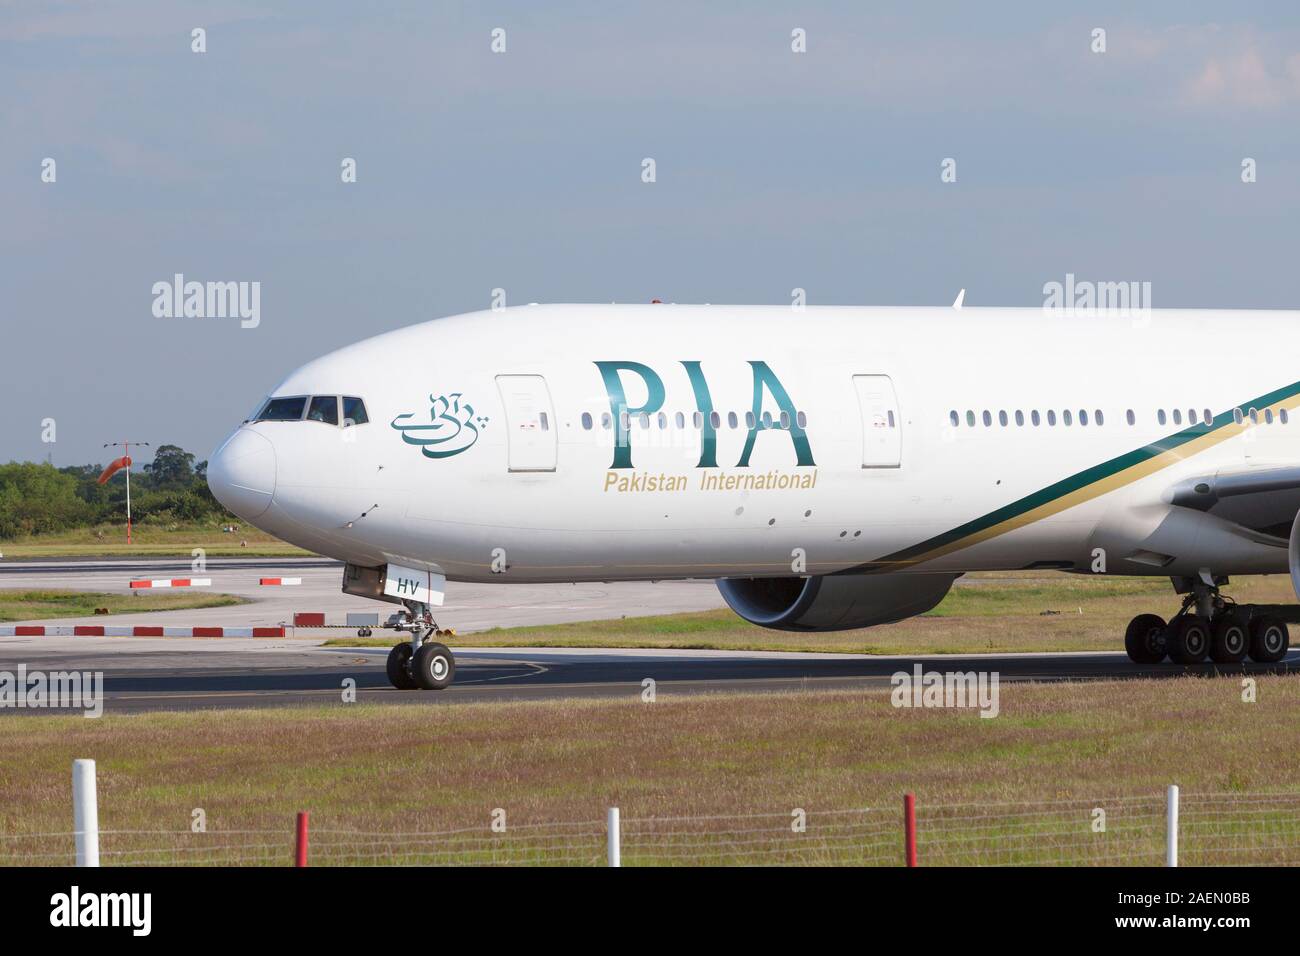 PIA Pakistan International Airlines, Angleterre Banque D'Images